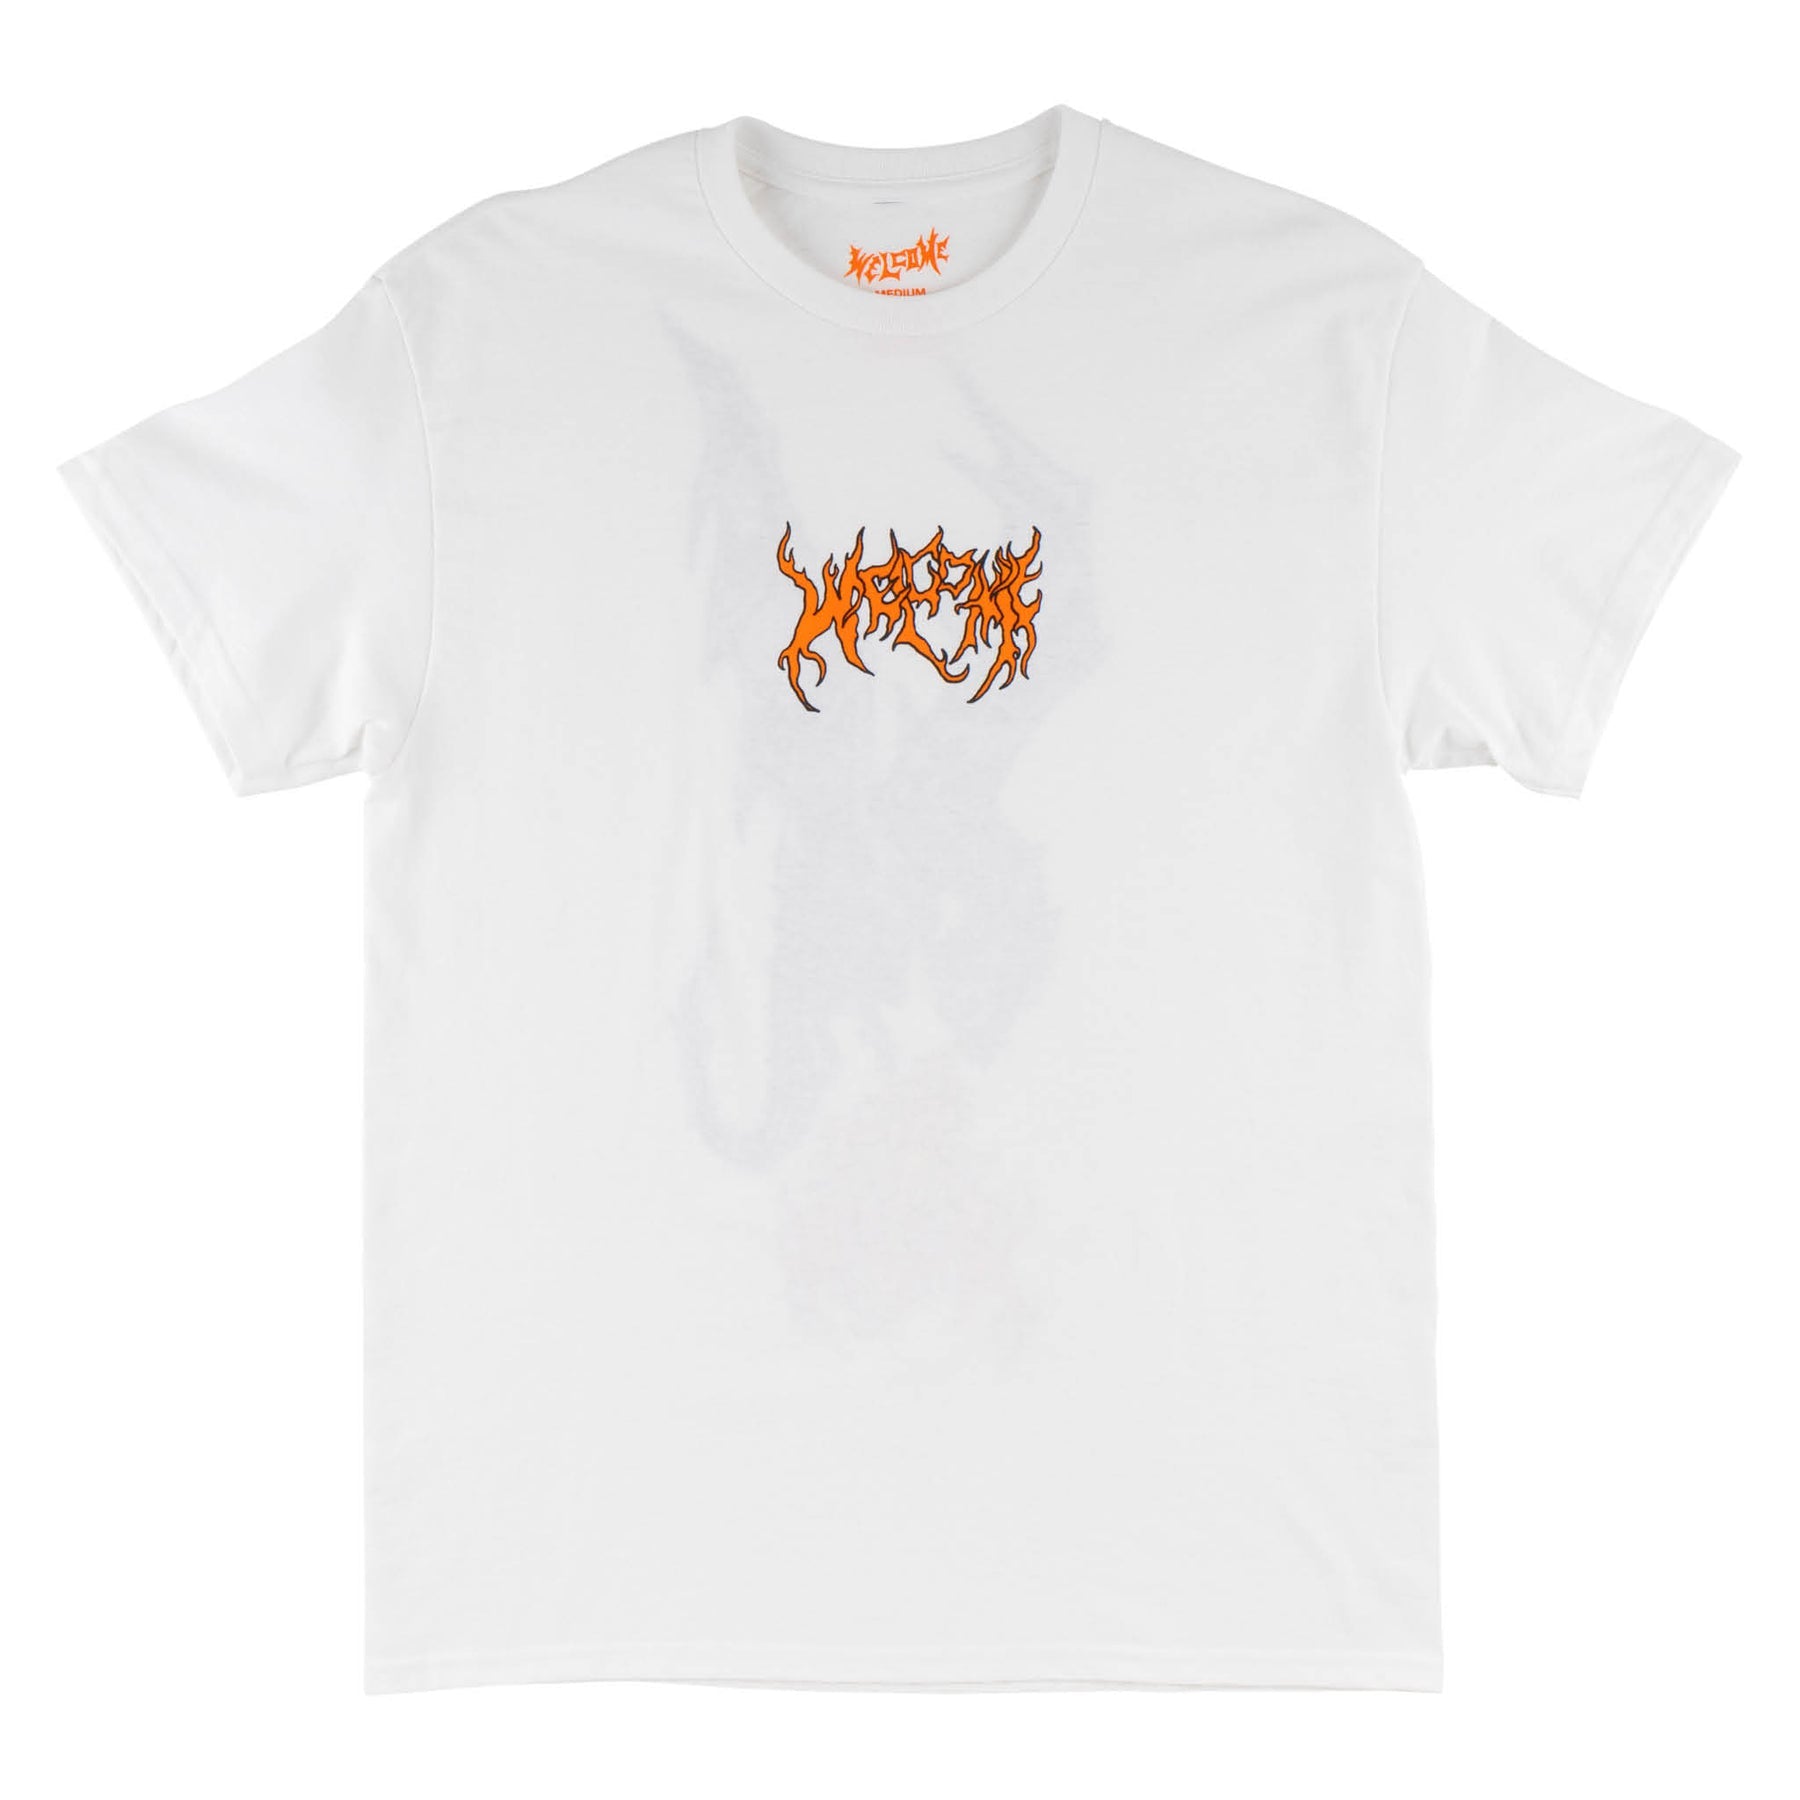 WELCOME FIRBREATHER TEE WHITE